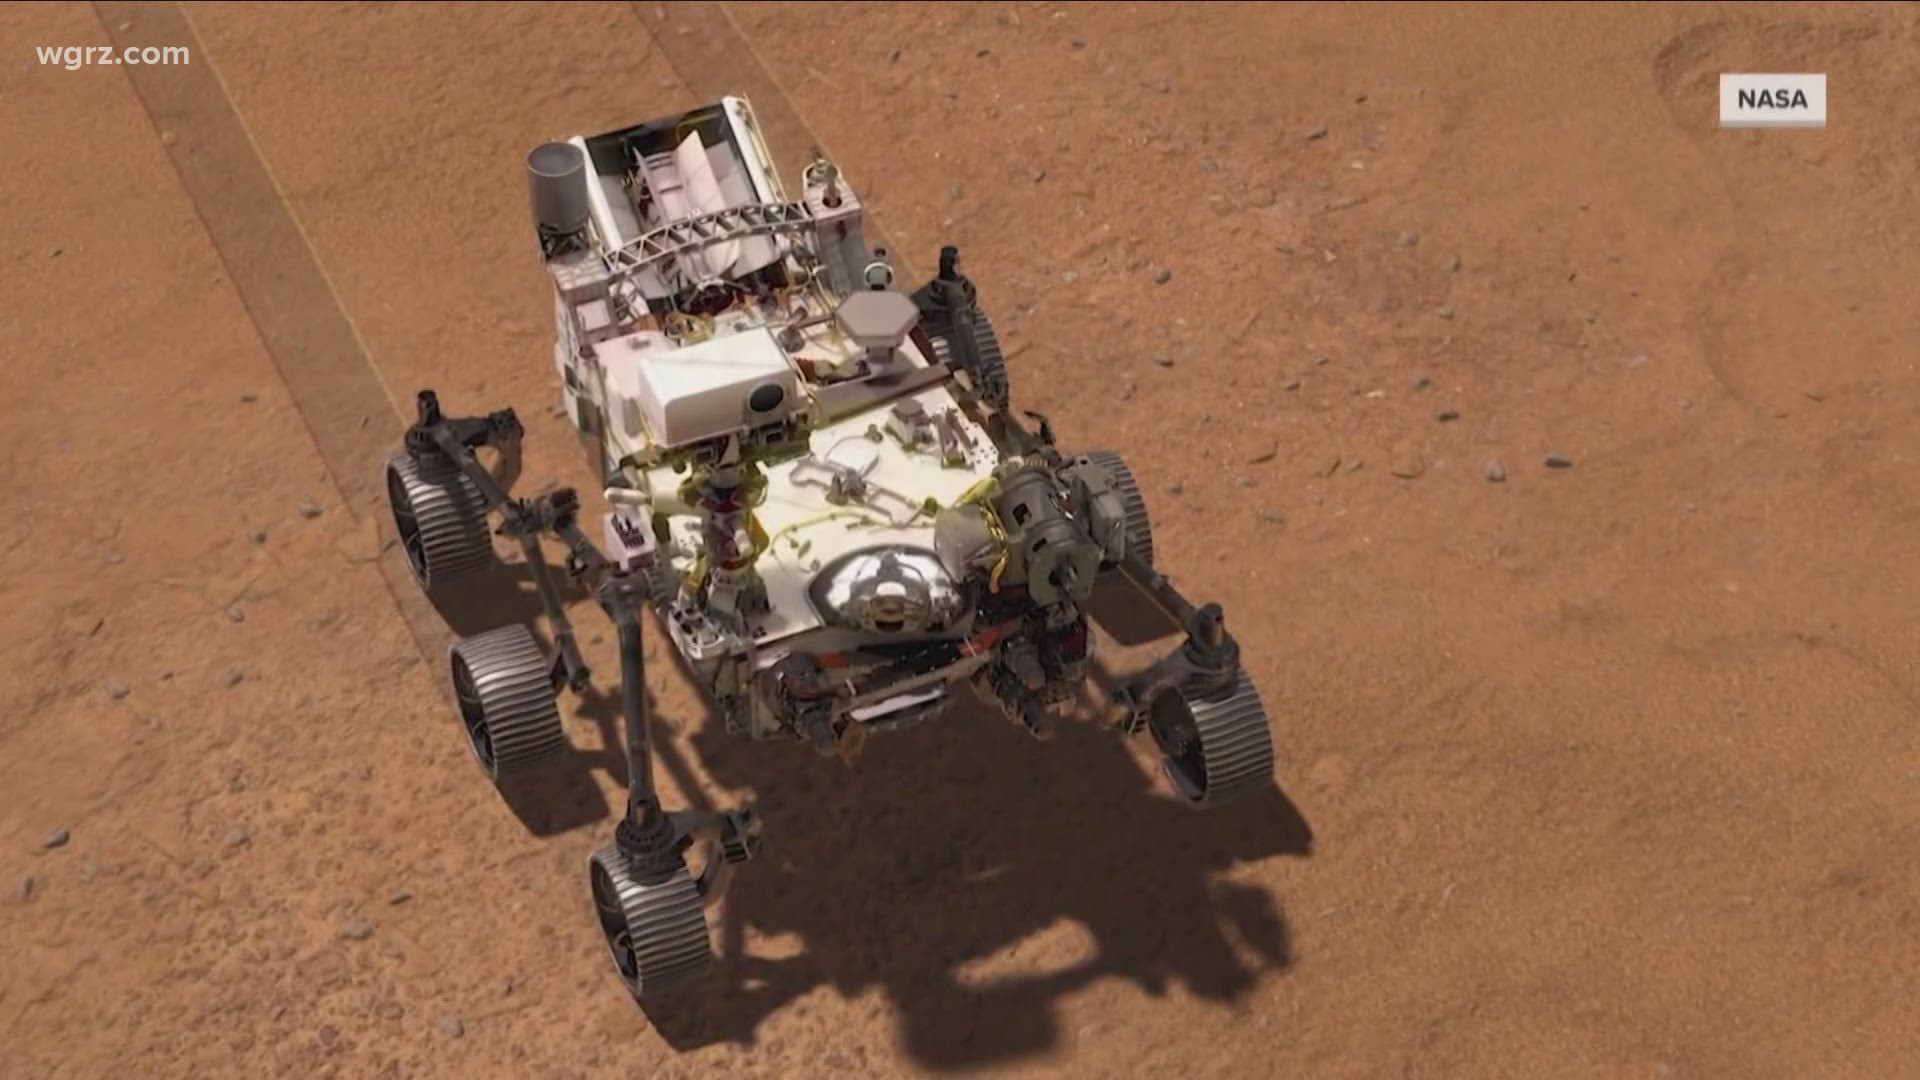 Perseverance successfully lands on Mars